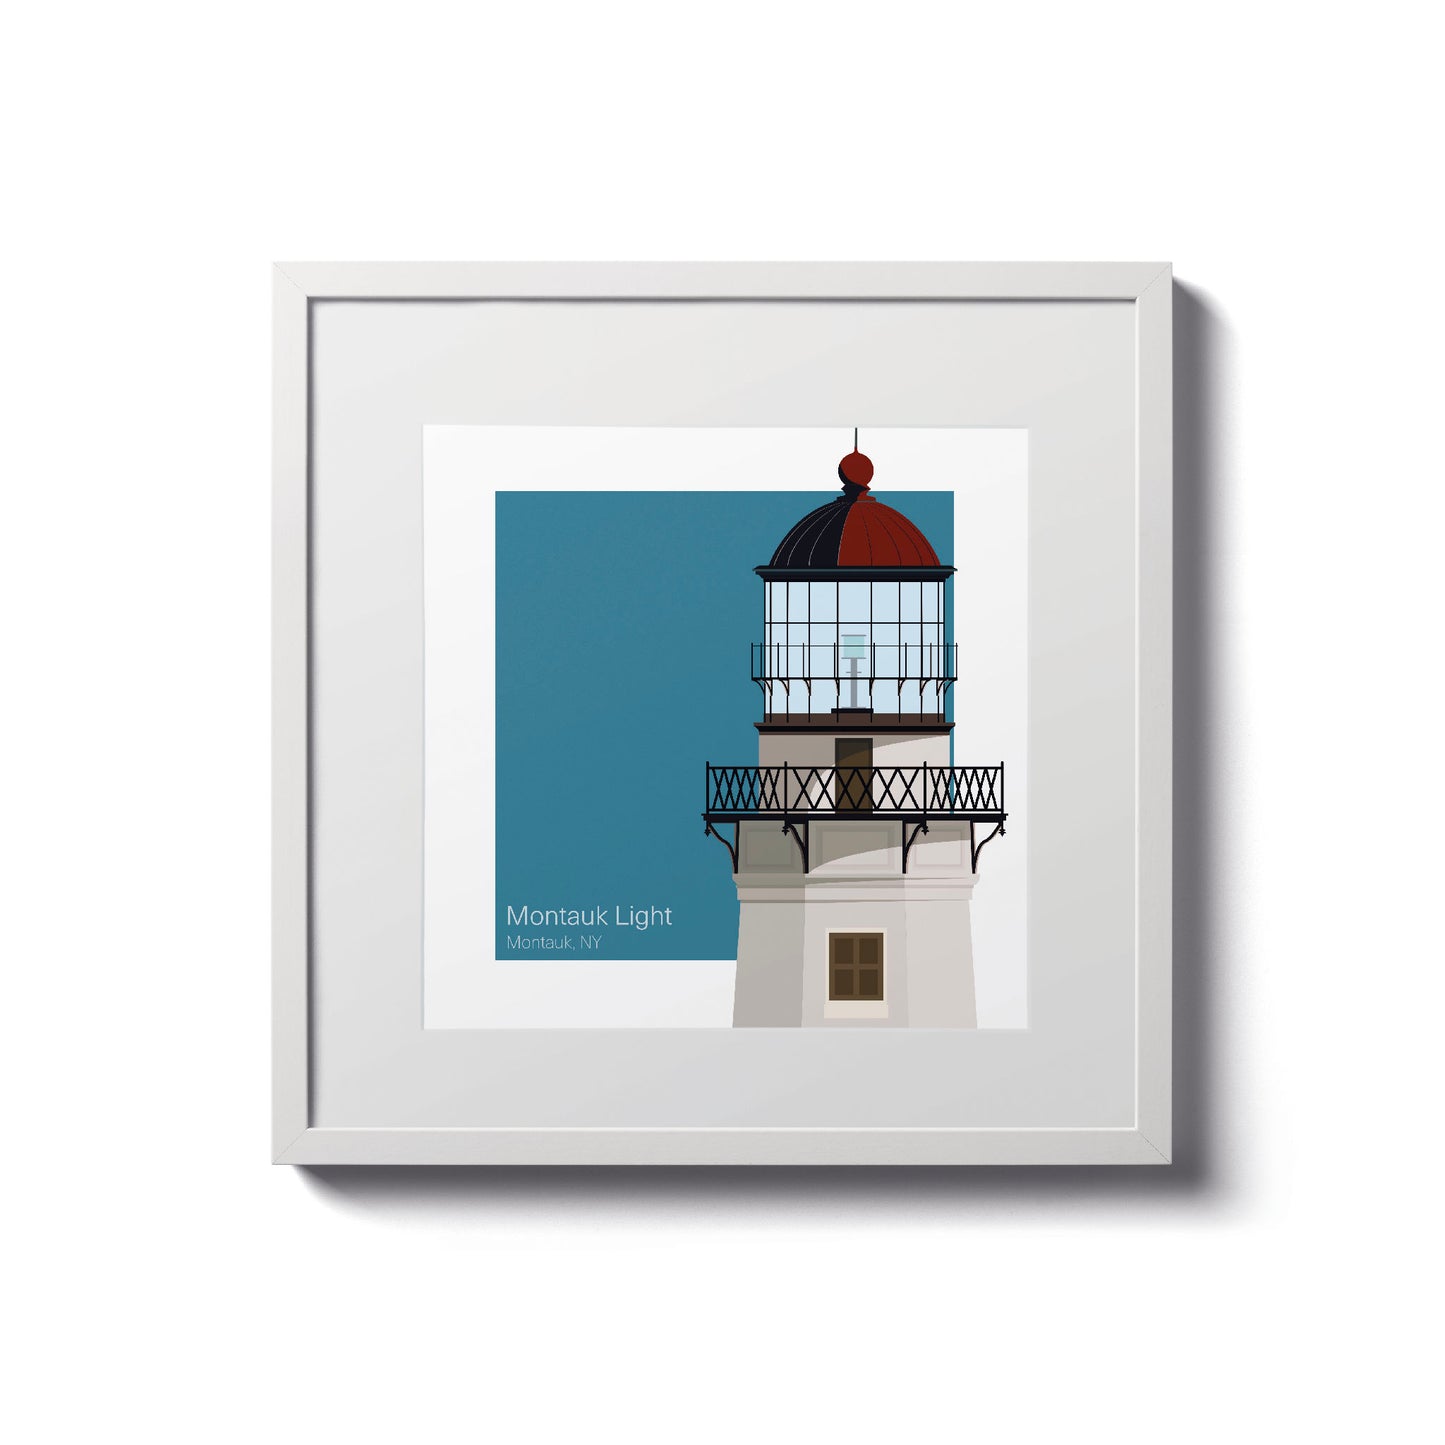 Illustration of the Montauk Point lighthouse, NY, USA. On a white background with aqua blue square as a backdrop., in a white frame  and measuring 8"x8" (20x20cm).